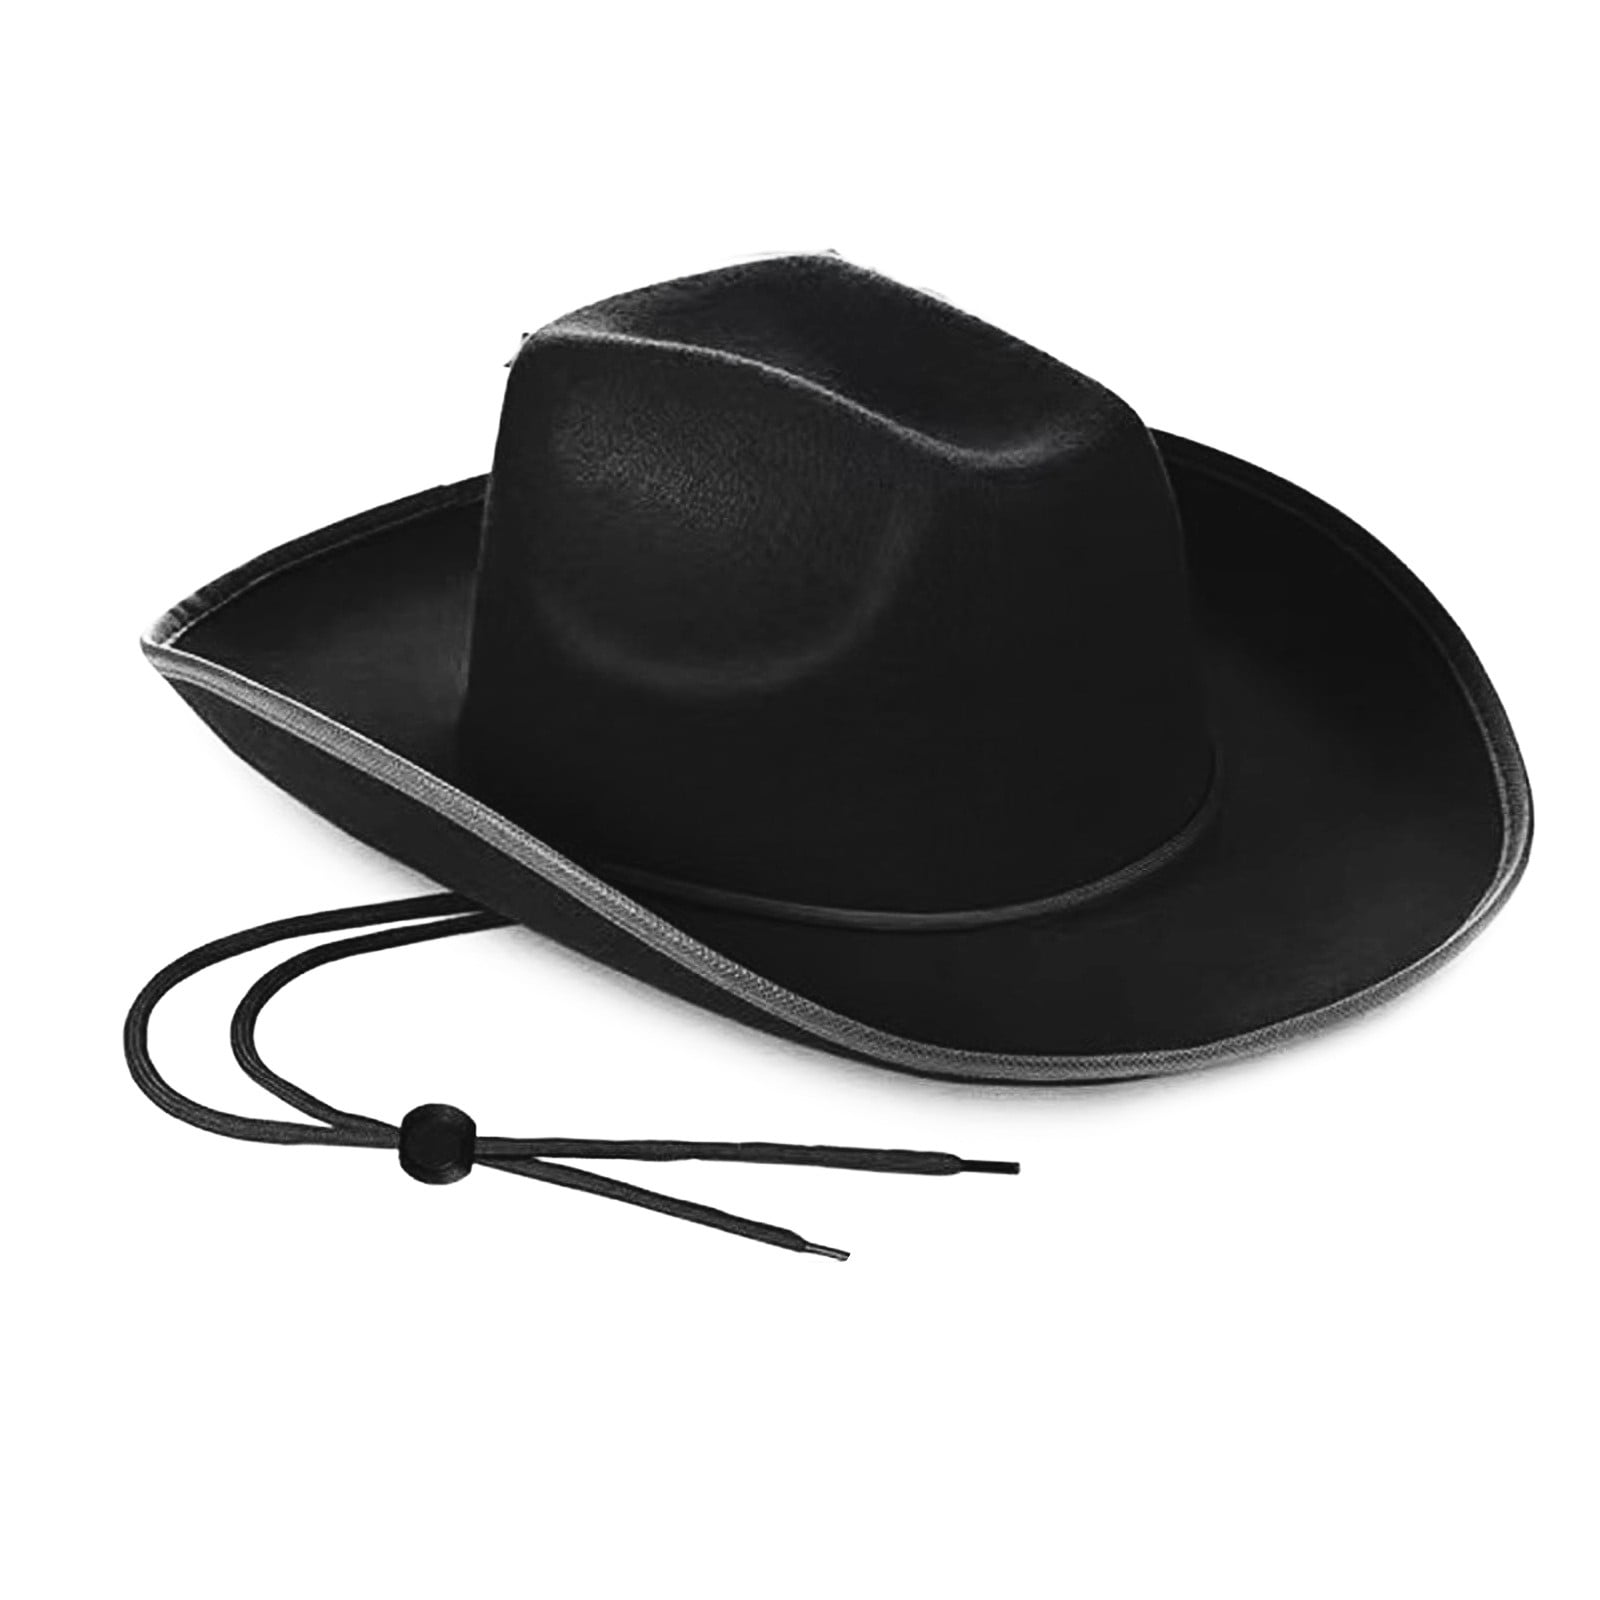 Cowboy Hat Stretcher,Large Size 7 1/2 to 10 5/8-Colourful Adjustable Buckle Heavy Duty(Large, Red)